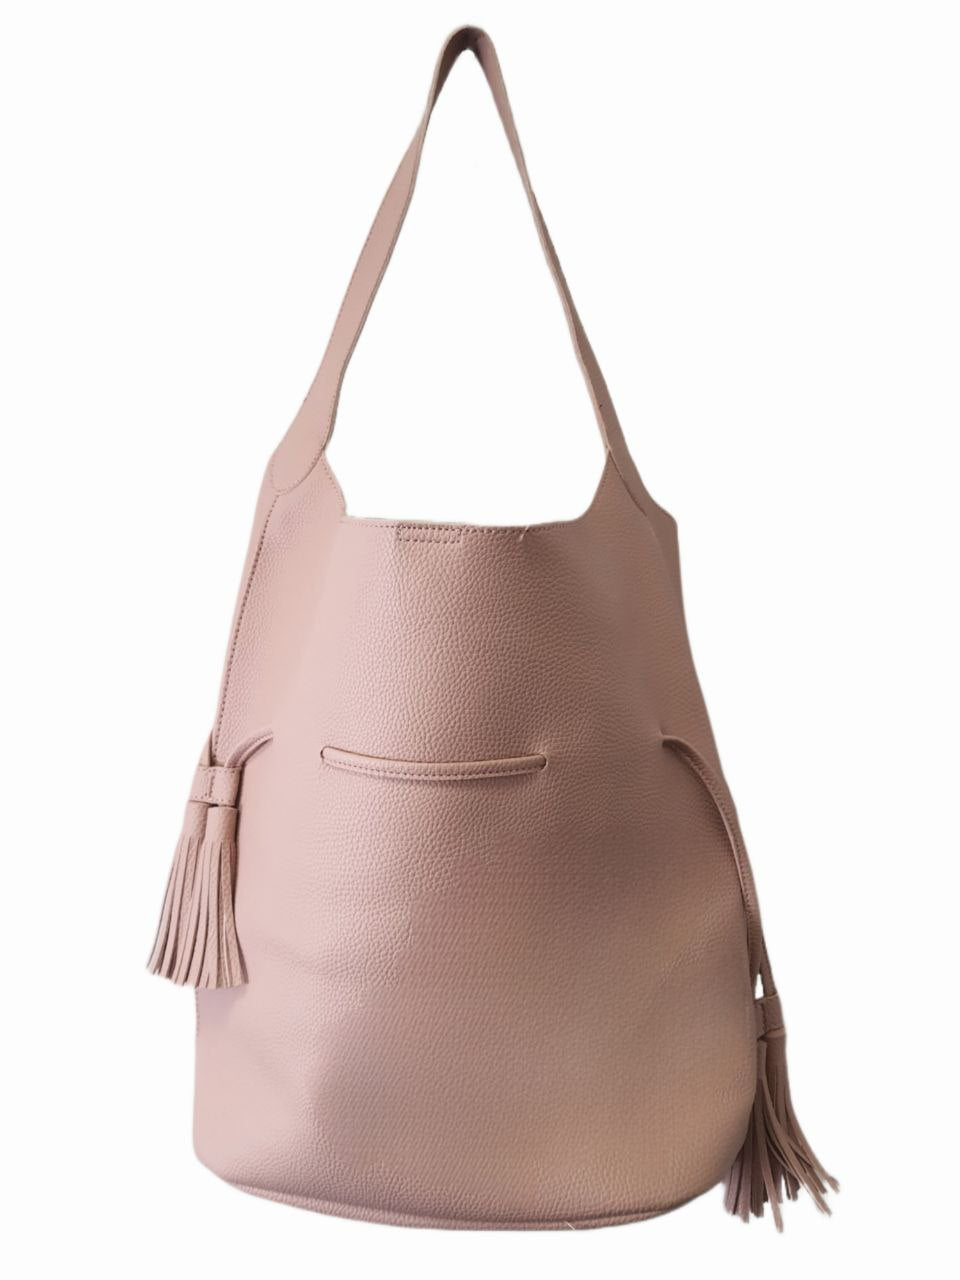 Maisie Large Pebbled Leather 3-in-1 Tote Bag | Michael Kors Canada